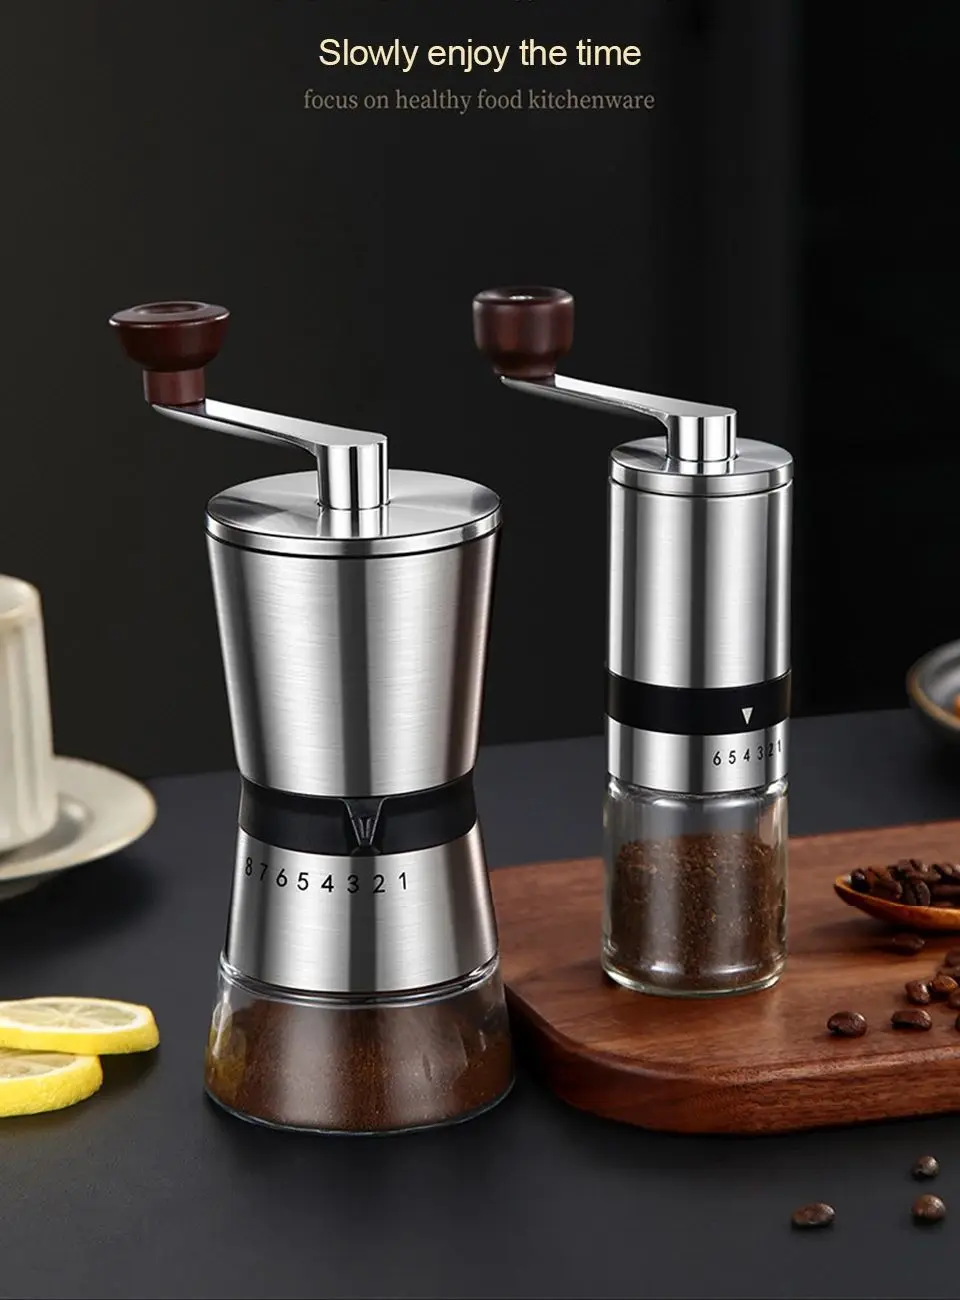 

Handle Coffee Bean Grinder Ceramic Grinde Core 6-8 Gears Precise Grinding Coarse Fine Uniform Easy to Clean for Cafe kitchen